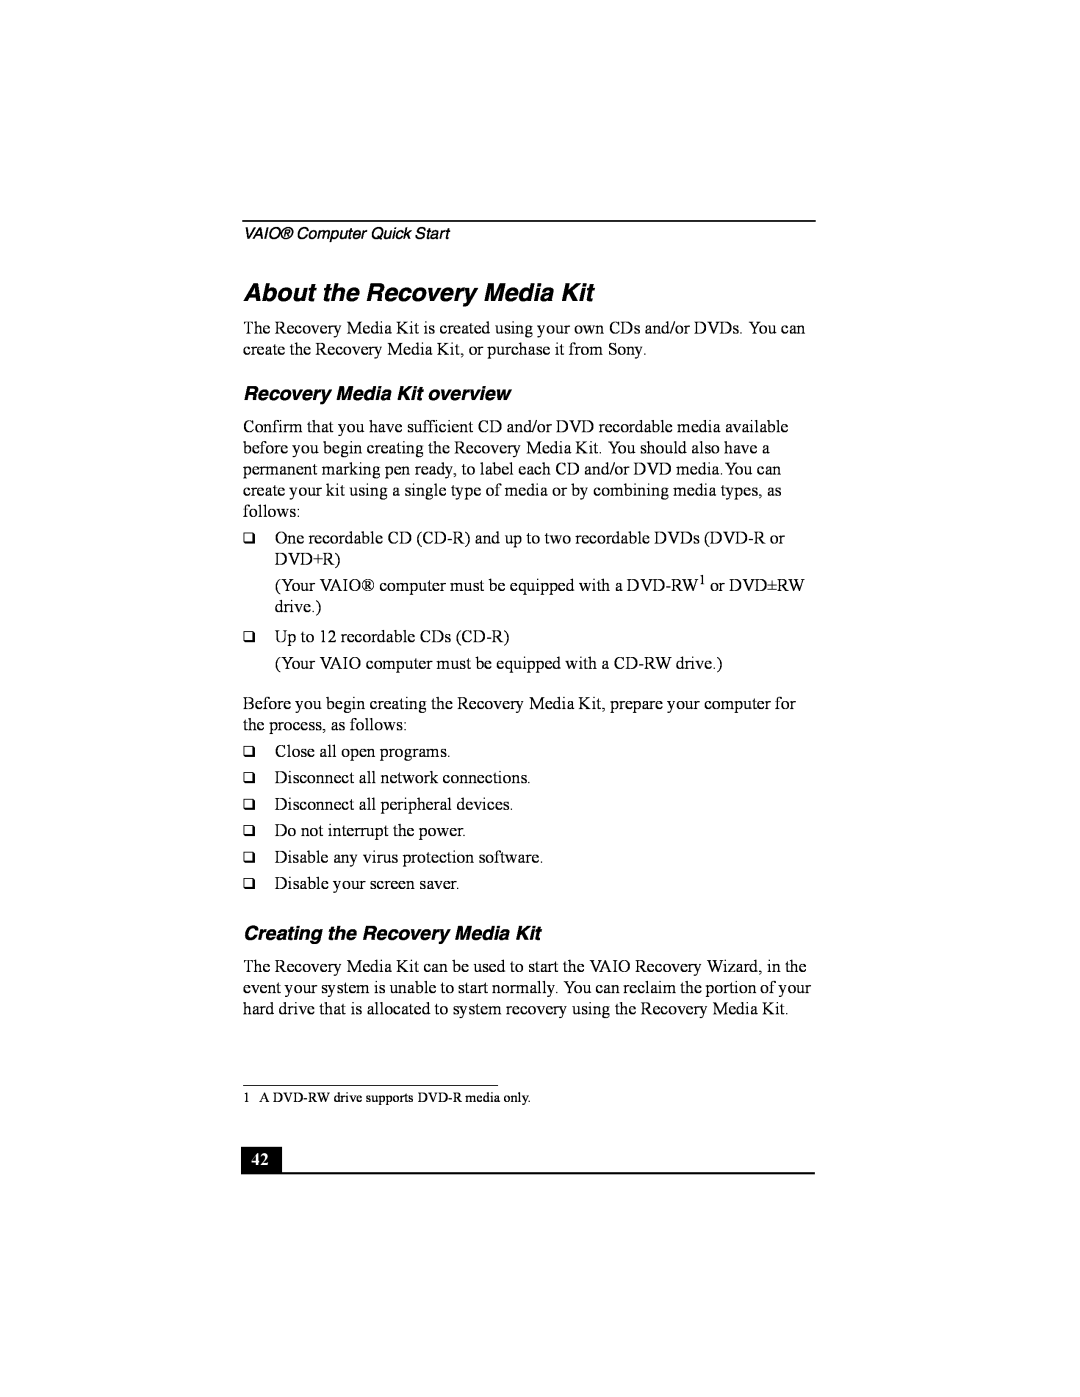 Sony PCG-FRV manual About the Recovery Media Kit, Recovery Media Kit overview, Creating the Recovery Media Kit 